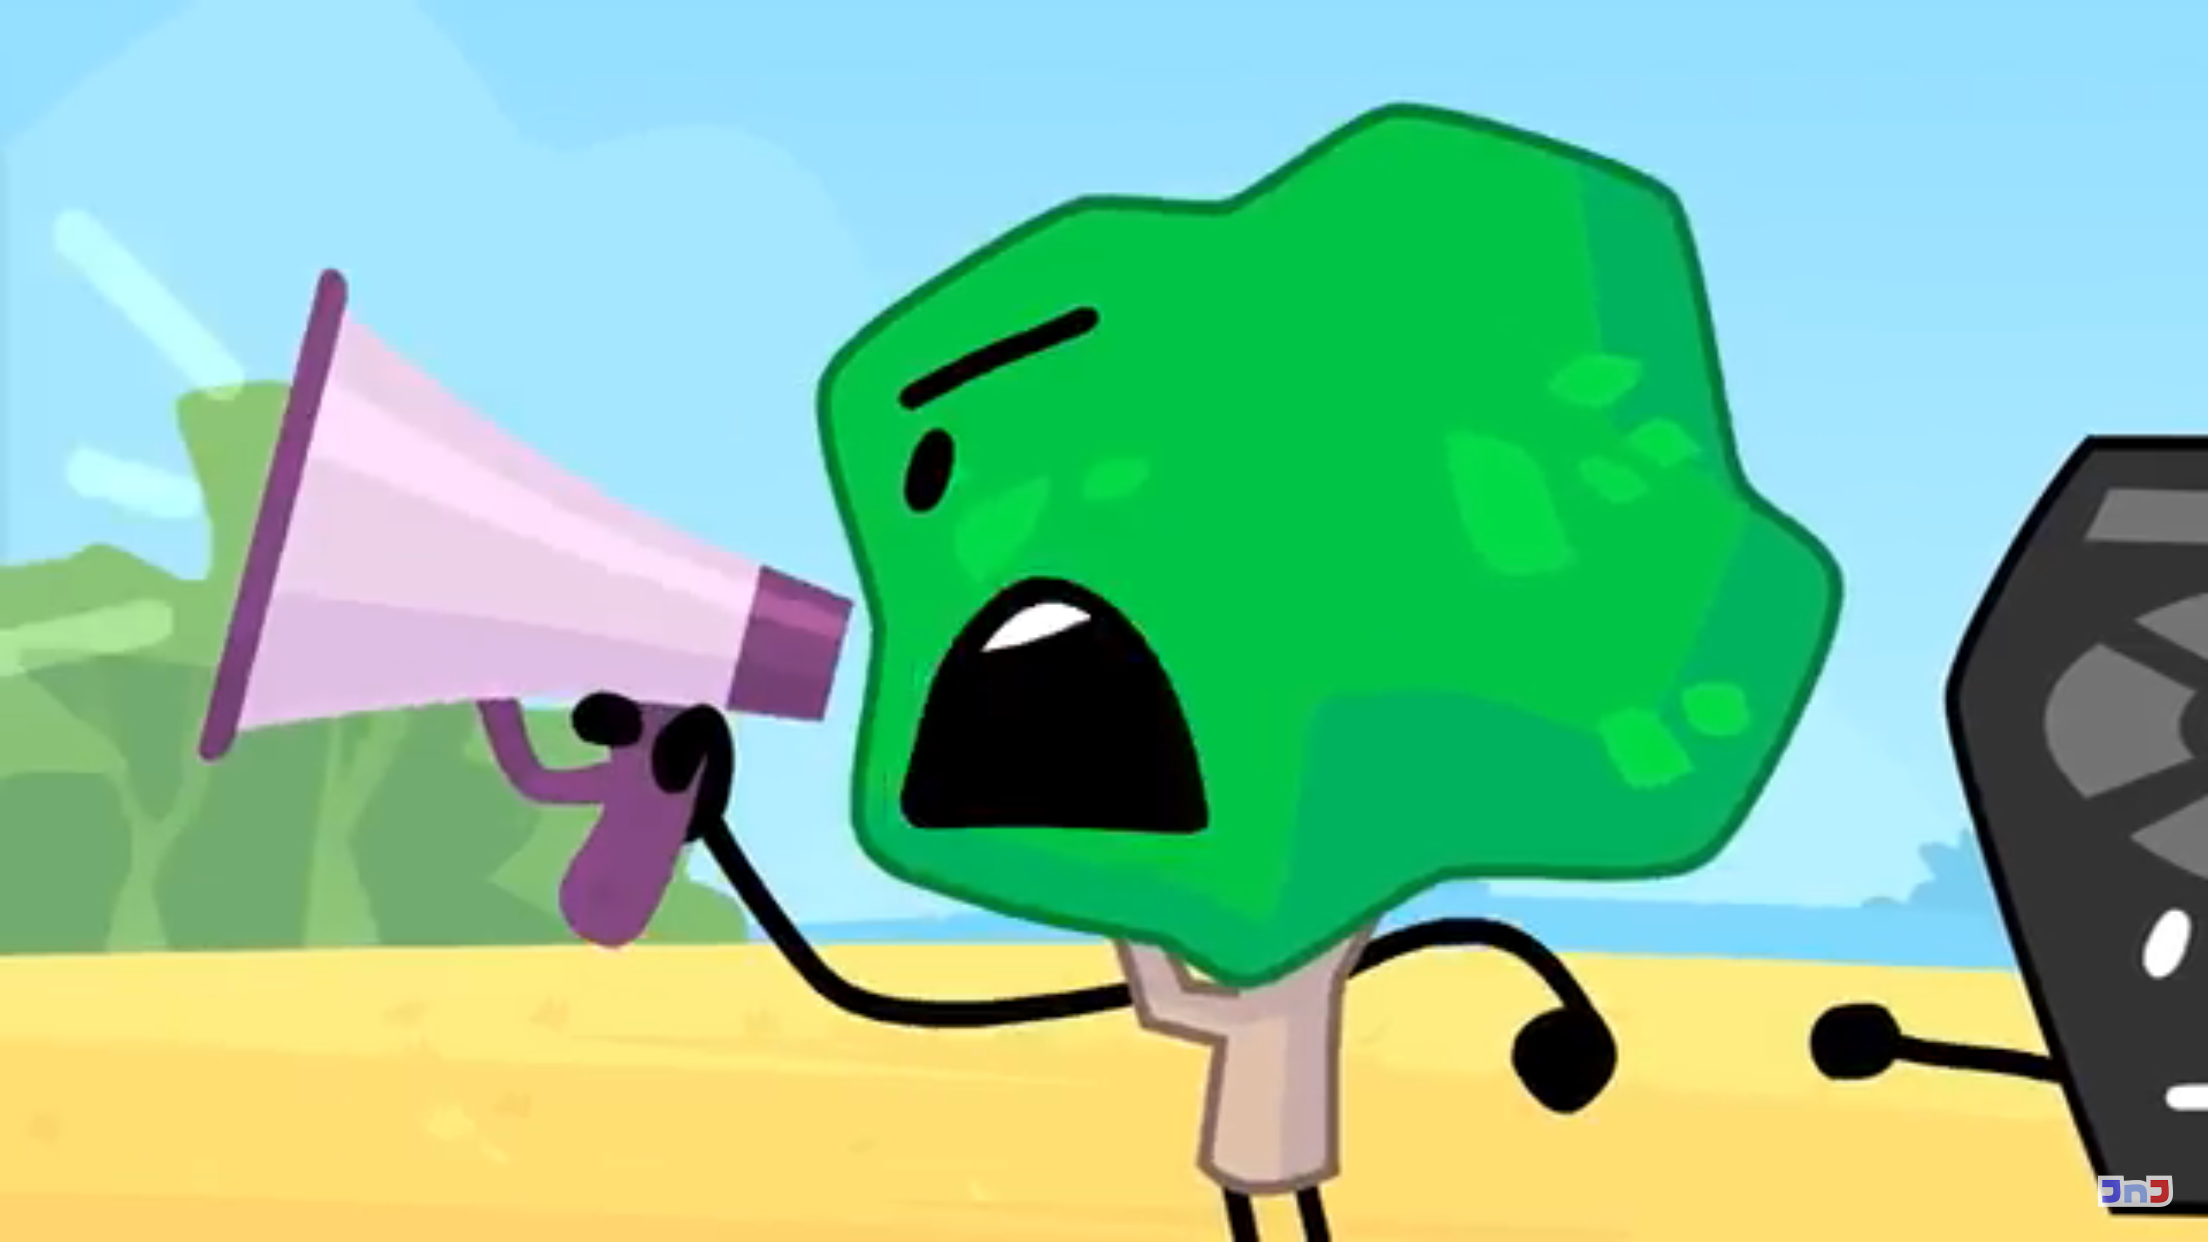 High Quality Tree yelling into a megaphone Blank Meme Template